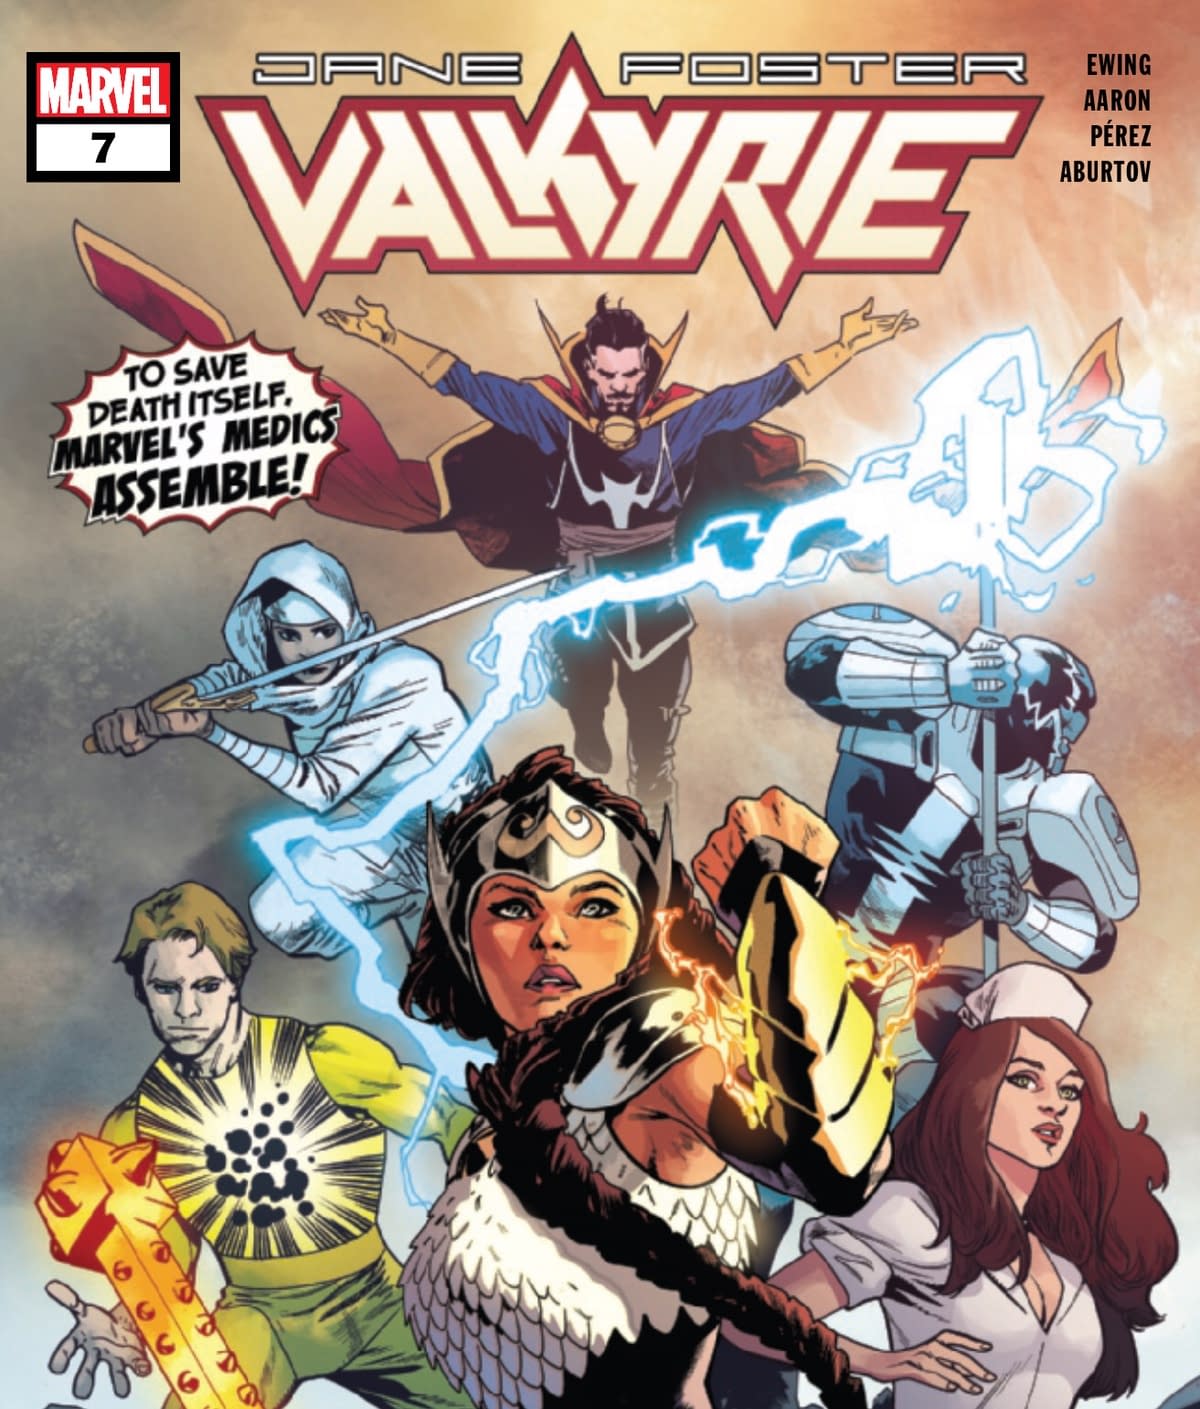 REVIEW: Valkyrie Jane Foster #7 -- "Makes The Core Conflict Seem Super Contrived"